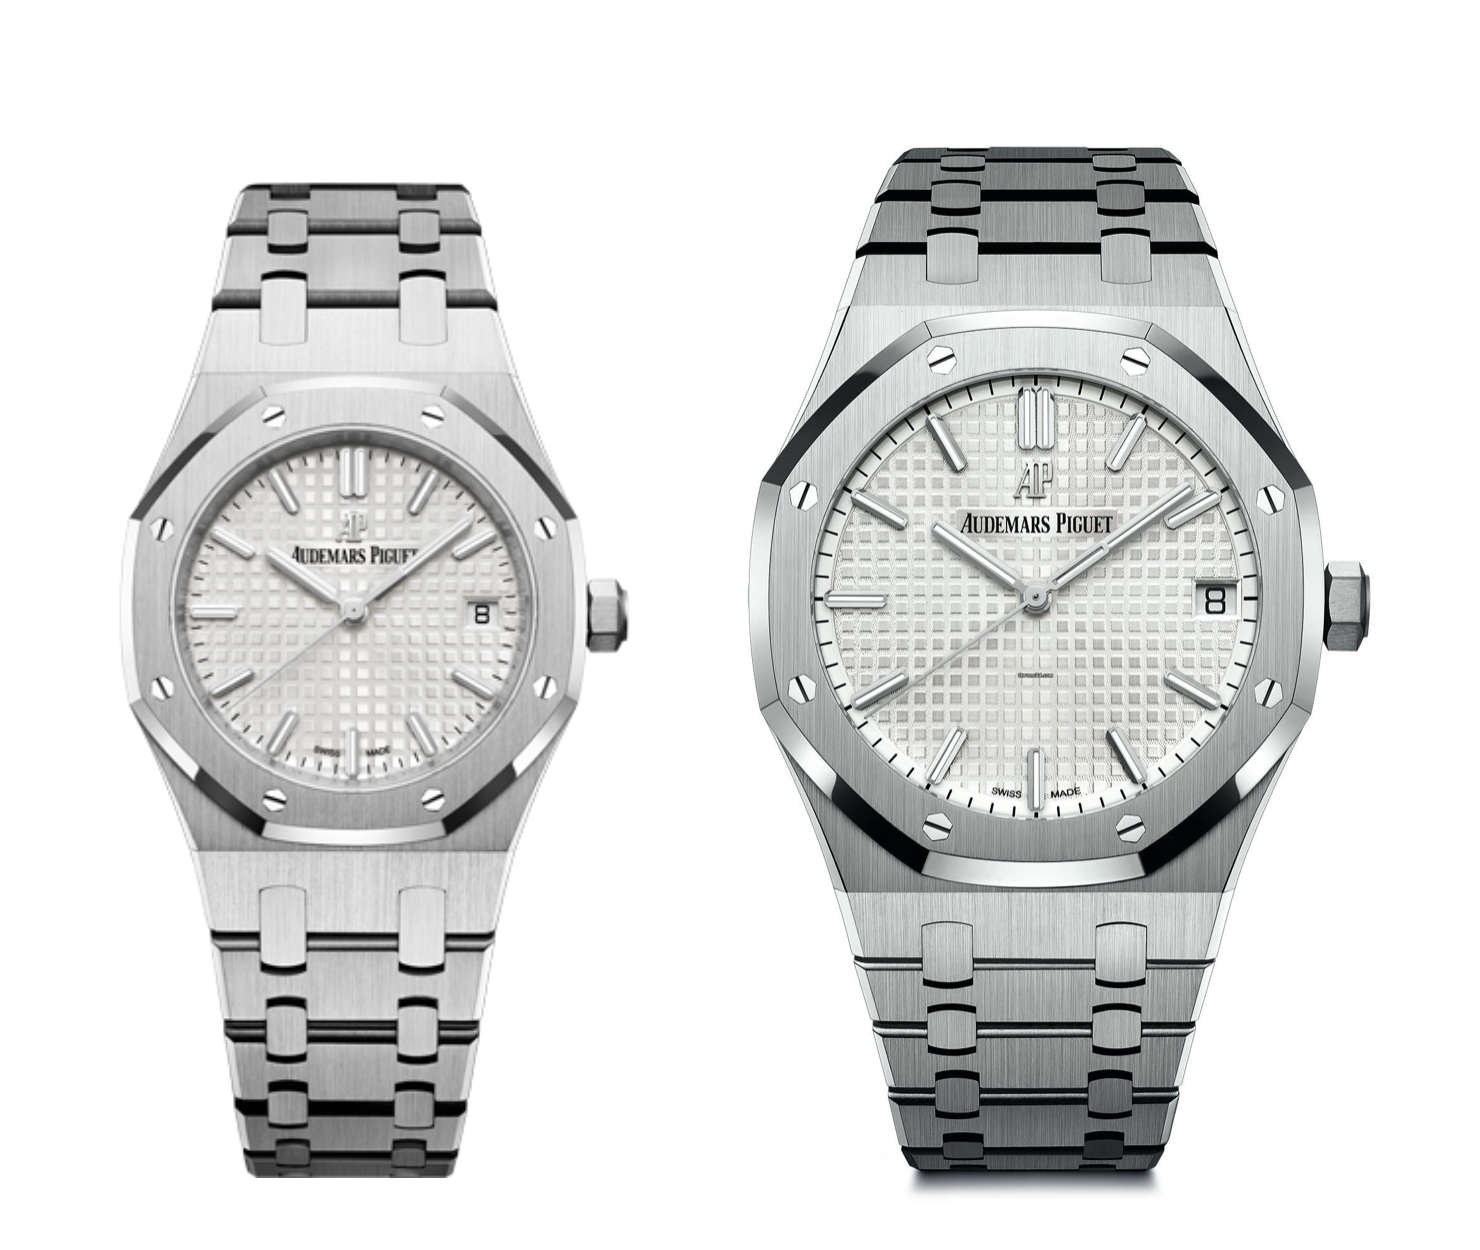 Style Edit: Couple goals? Classic Omega watches to pair with your